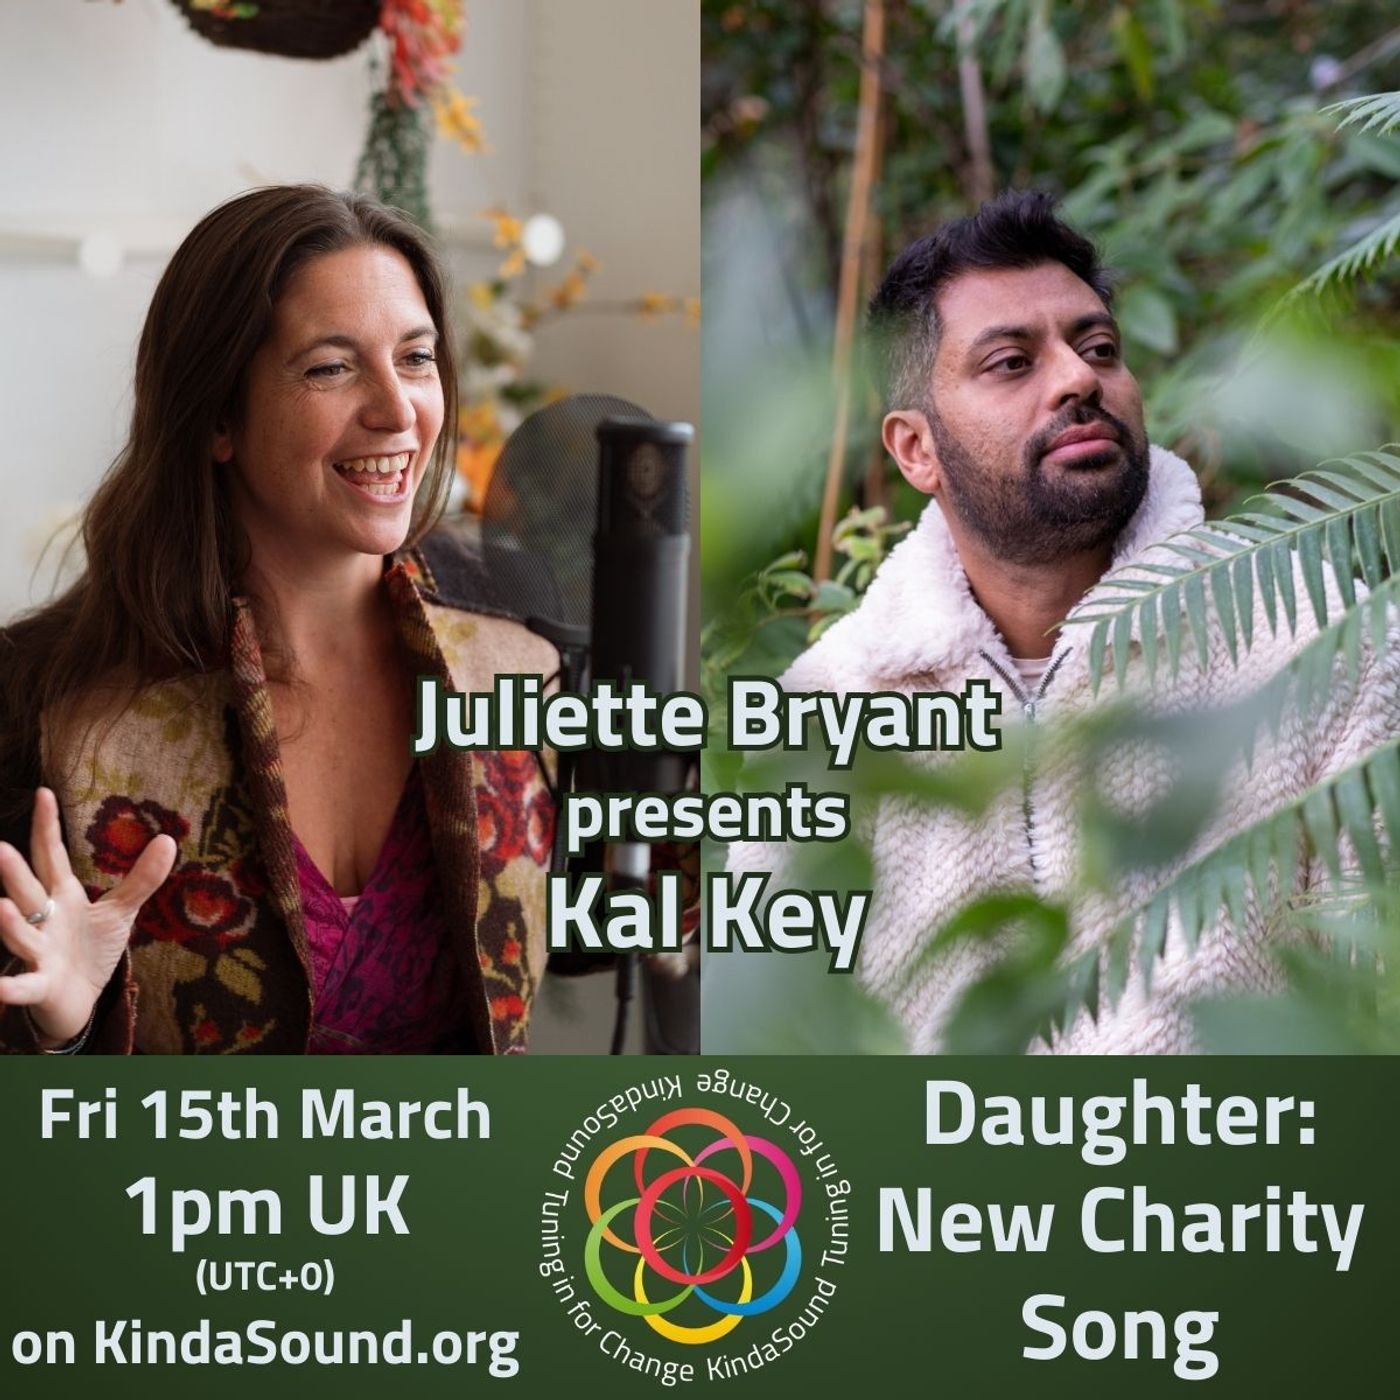 Daughter: A Musical Prayer for Woman Facing Abuse | Juliette Bryant chats to musician Kal Key